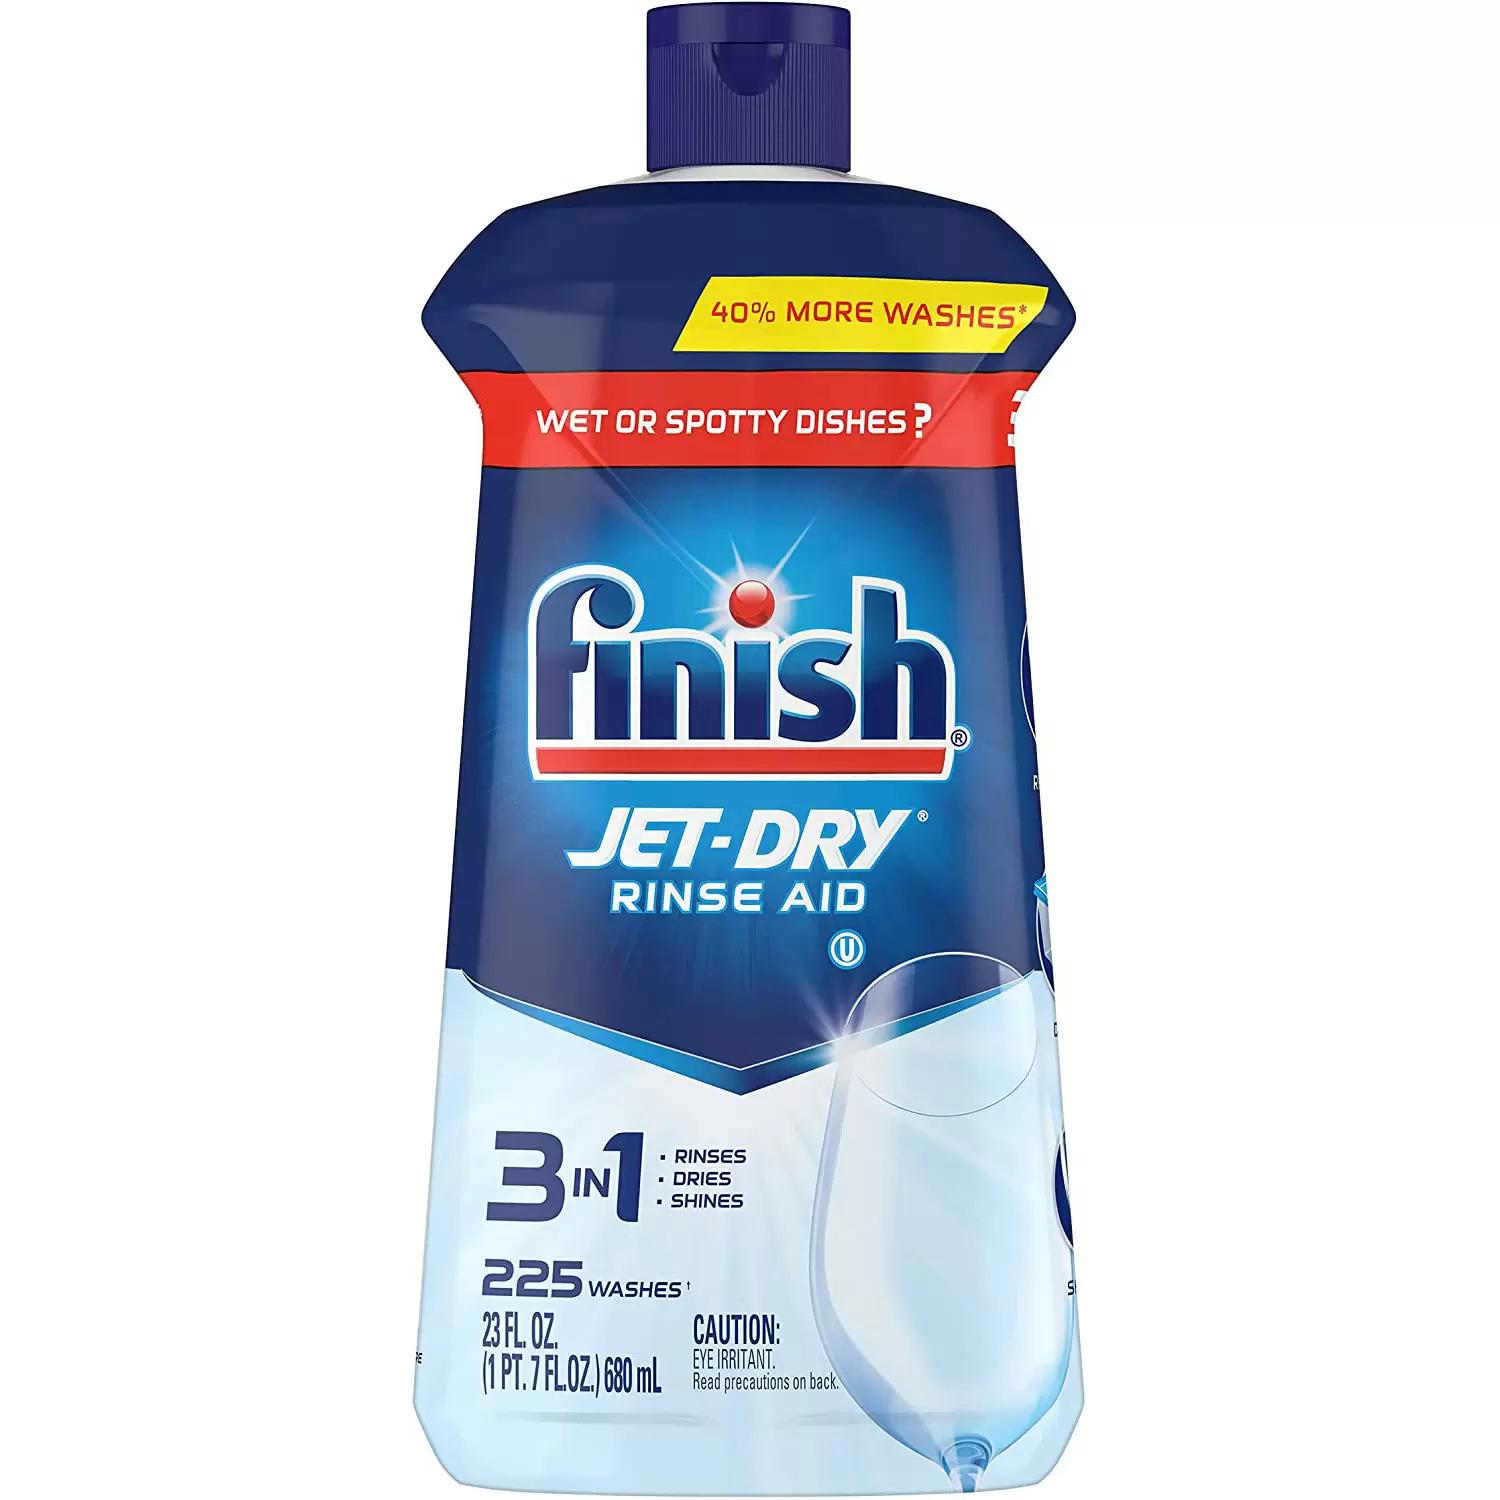 Finish Jet-Dry Rinse Aid for $7.20 Shipped